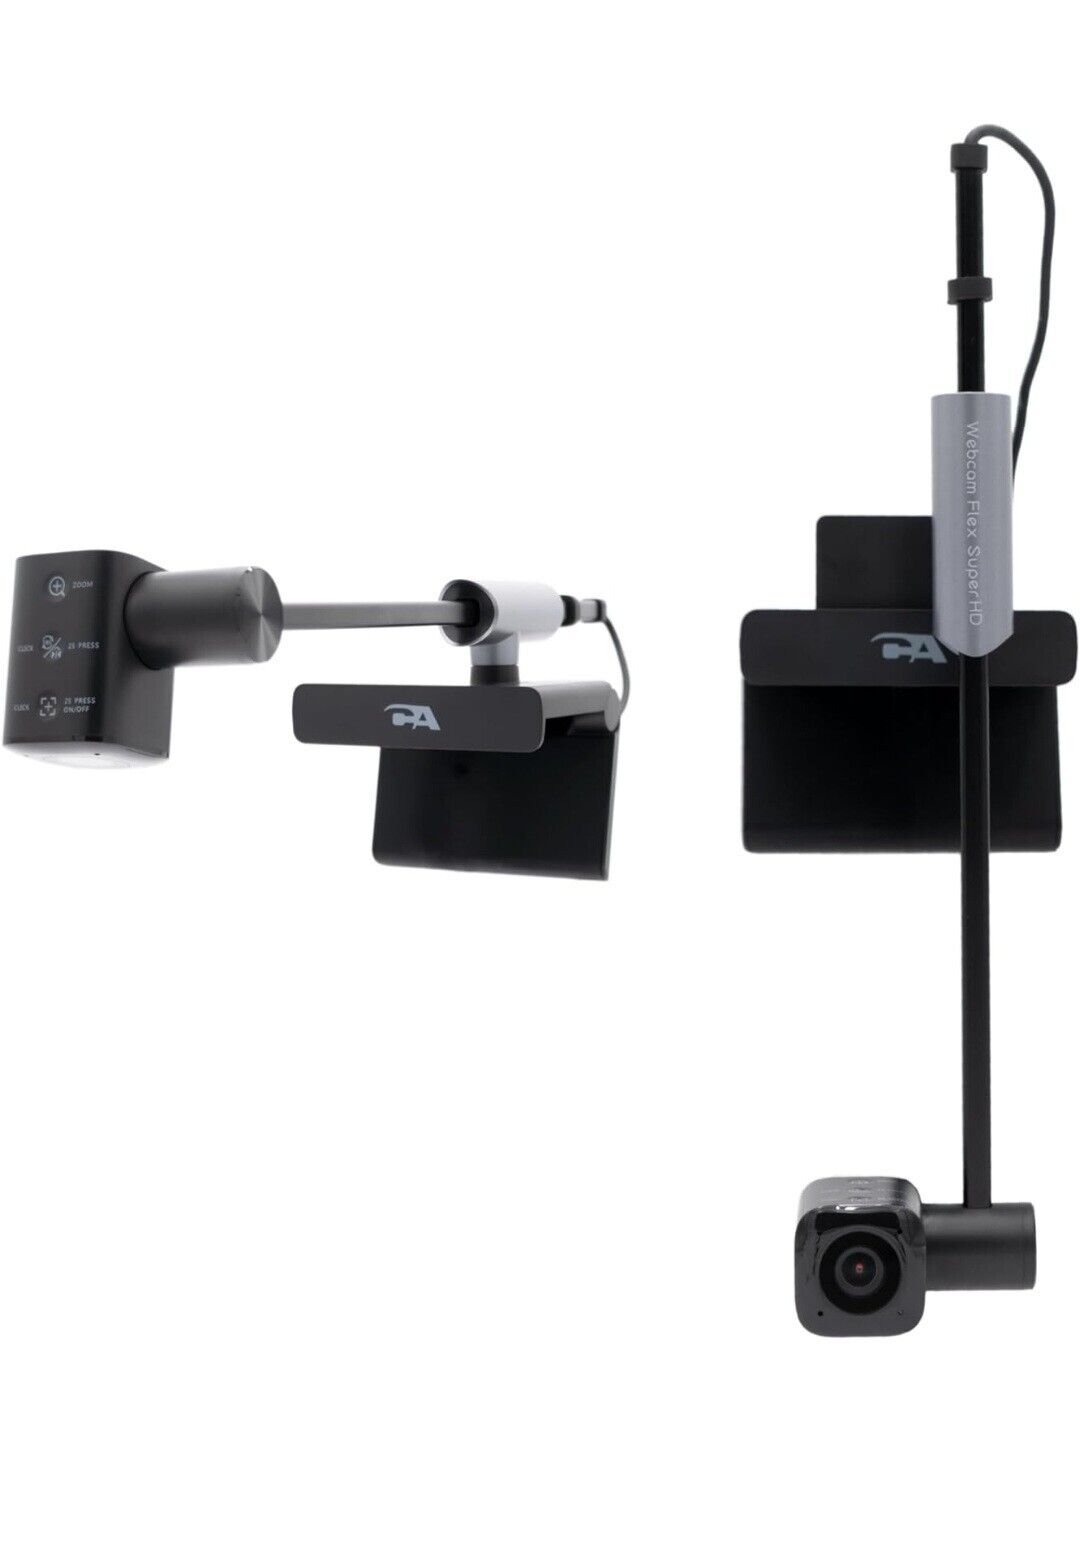 Webcam FLEX - HD webcam with three mounting positions, 1080p, Plug And Play